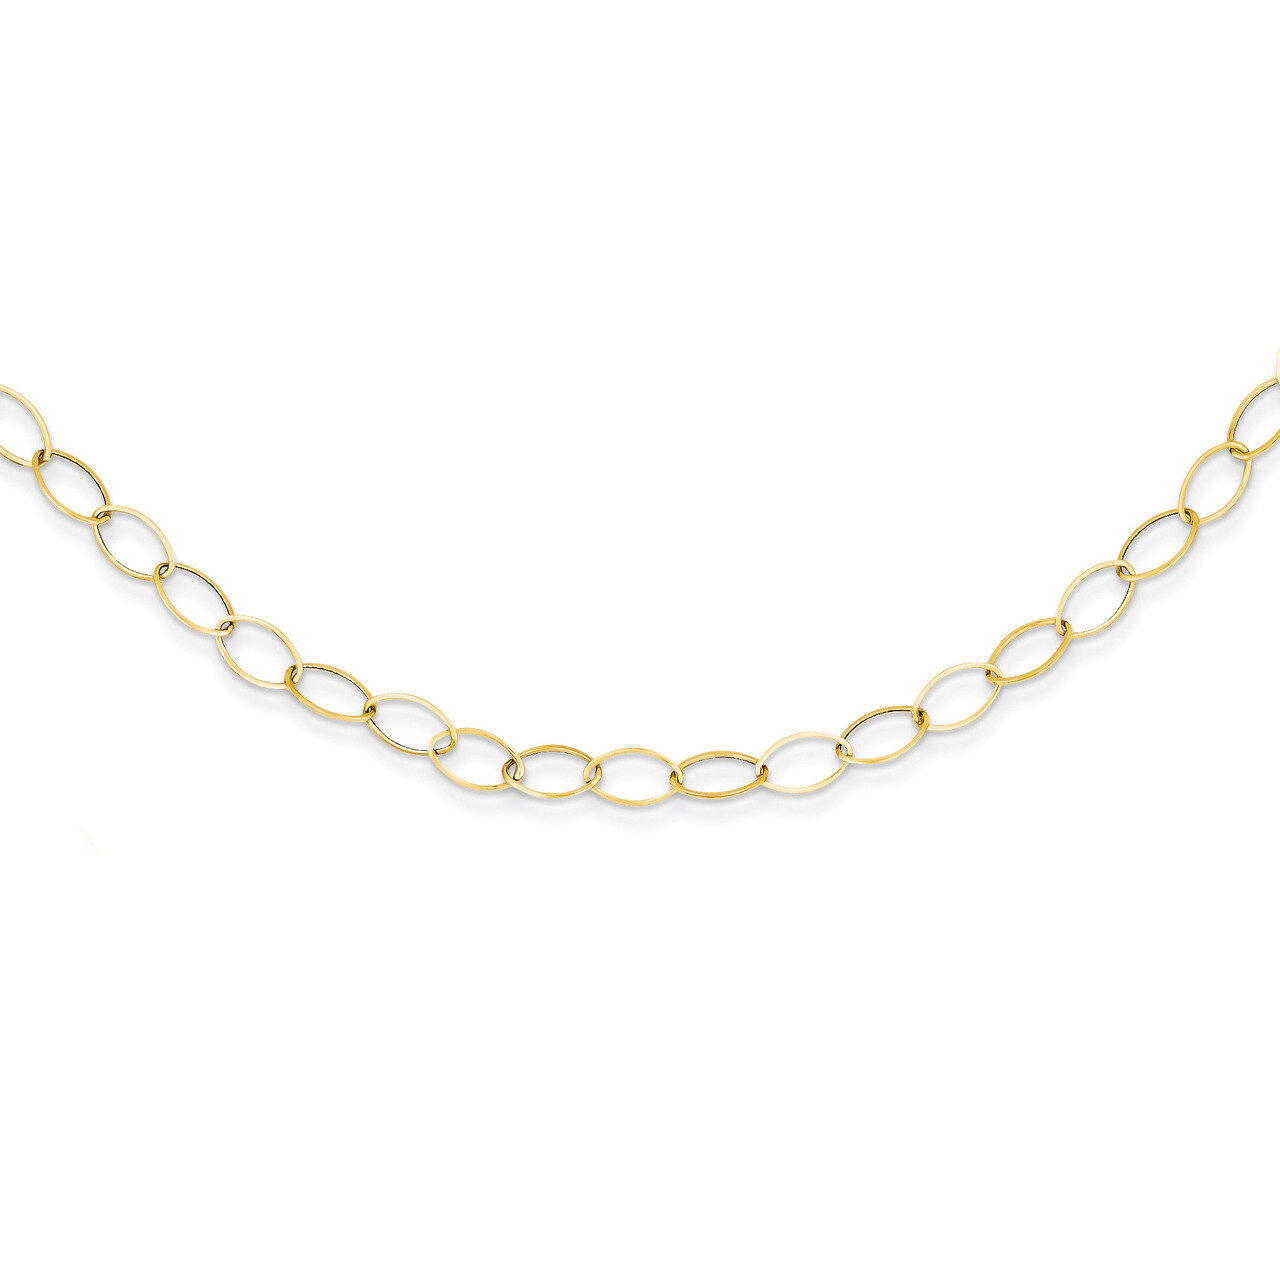 Oval Link Necklace 18 Inch 14k Gold SF1848-18